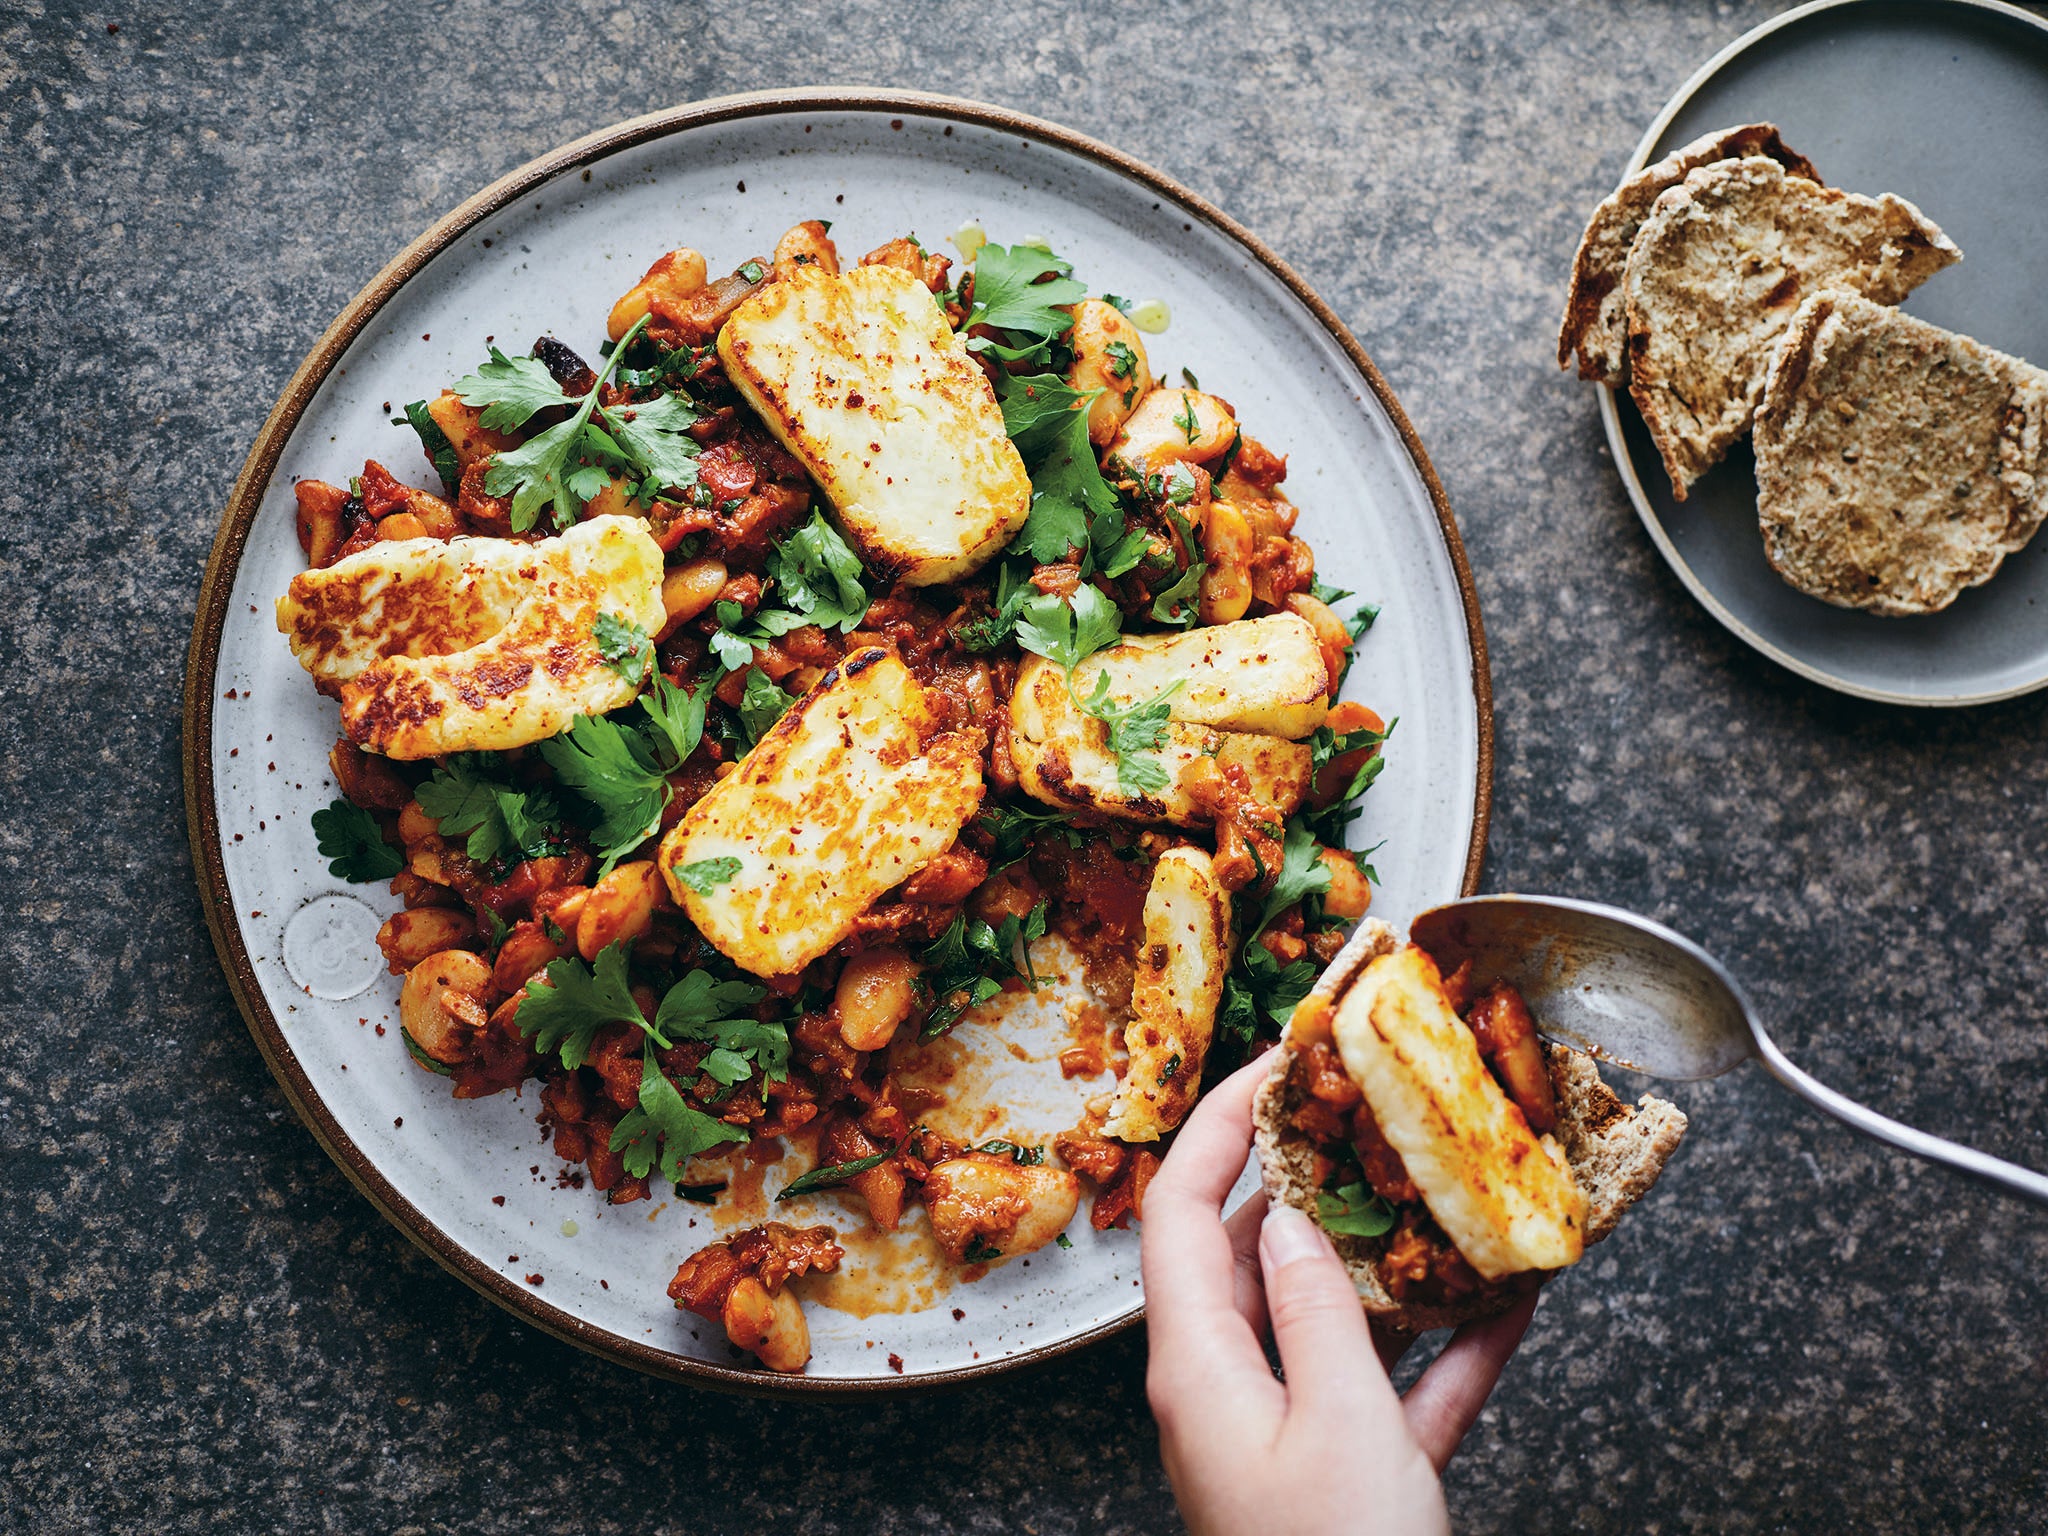 Say cheese: this halloumi dish is dripping with flavour